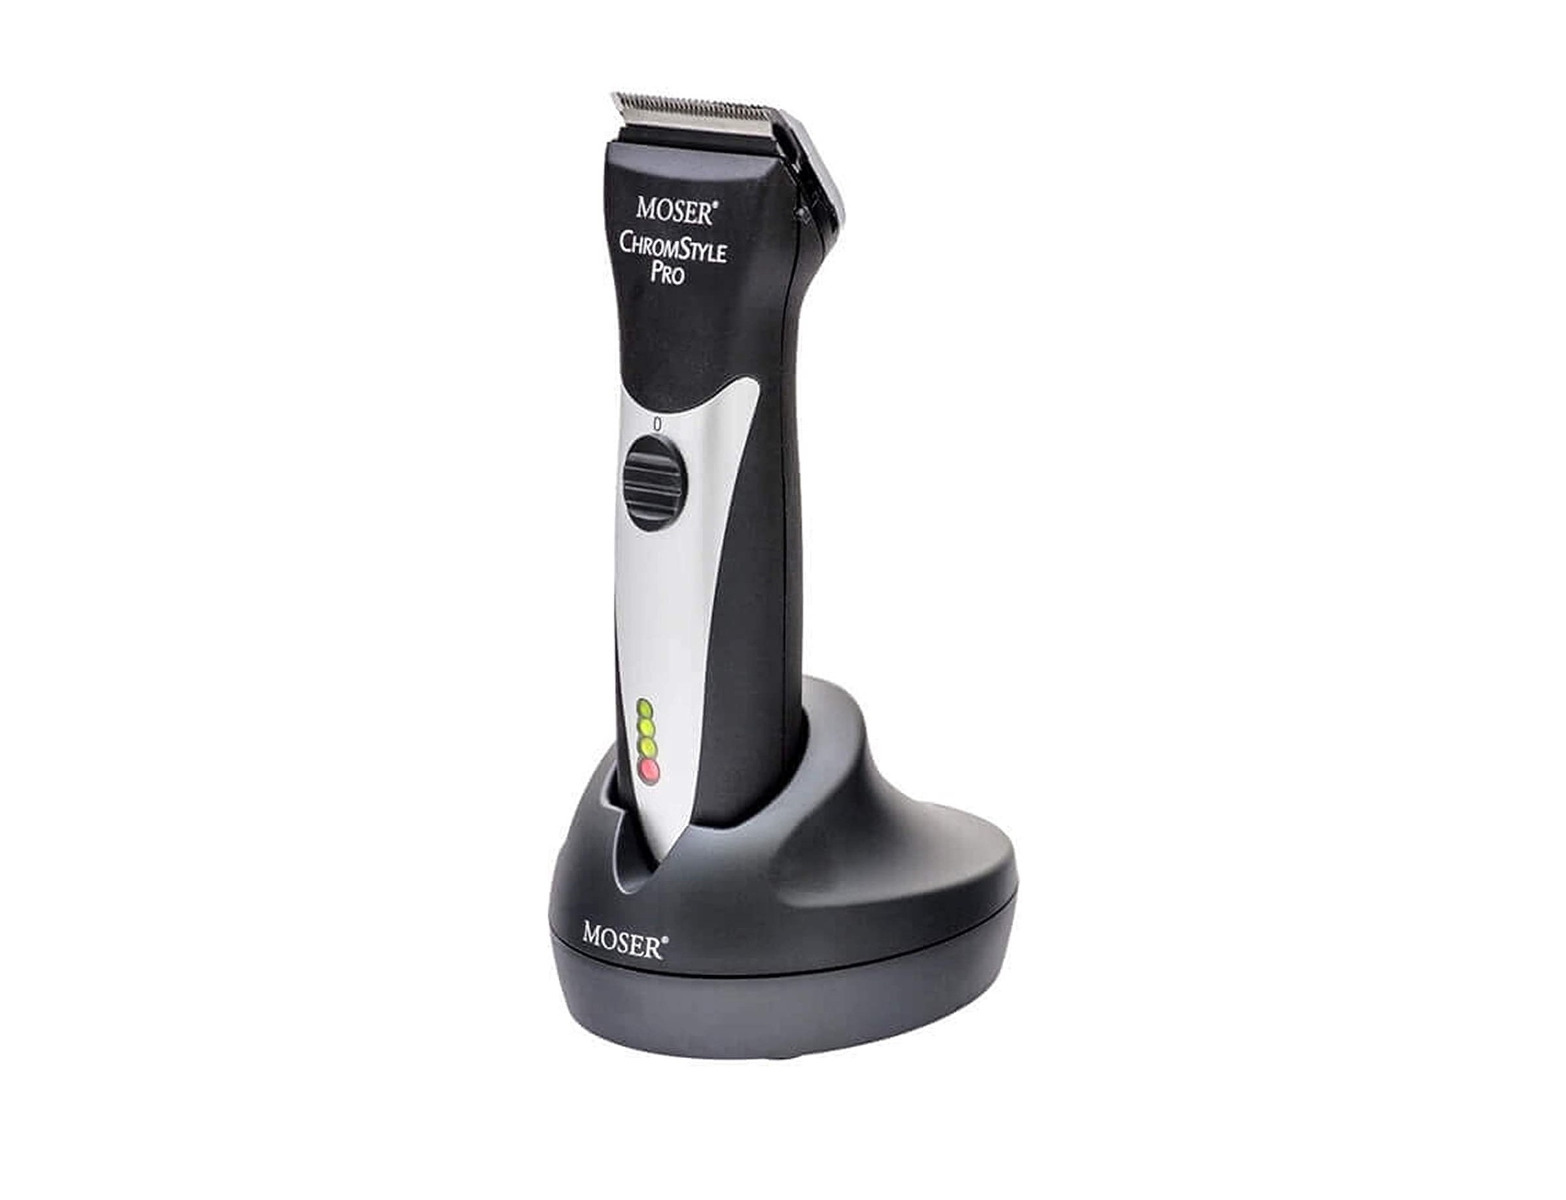 Moser Chromstyle Professional CordCordless Hair Clipper, Black, Germany - 1871-0181